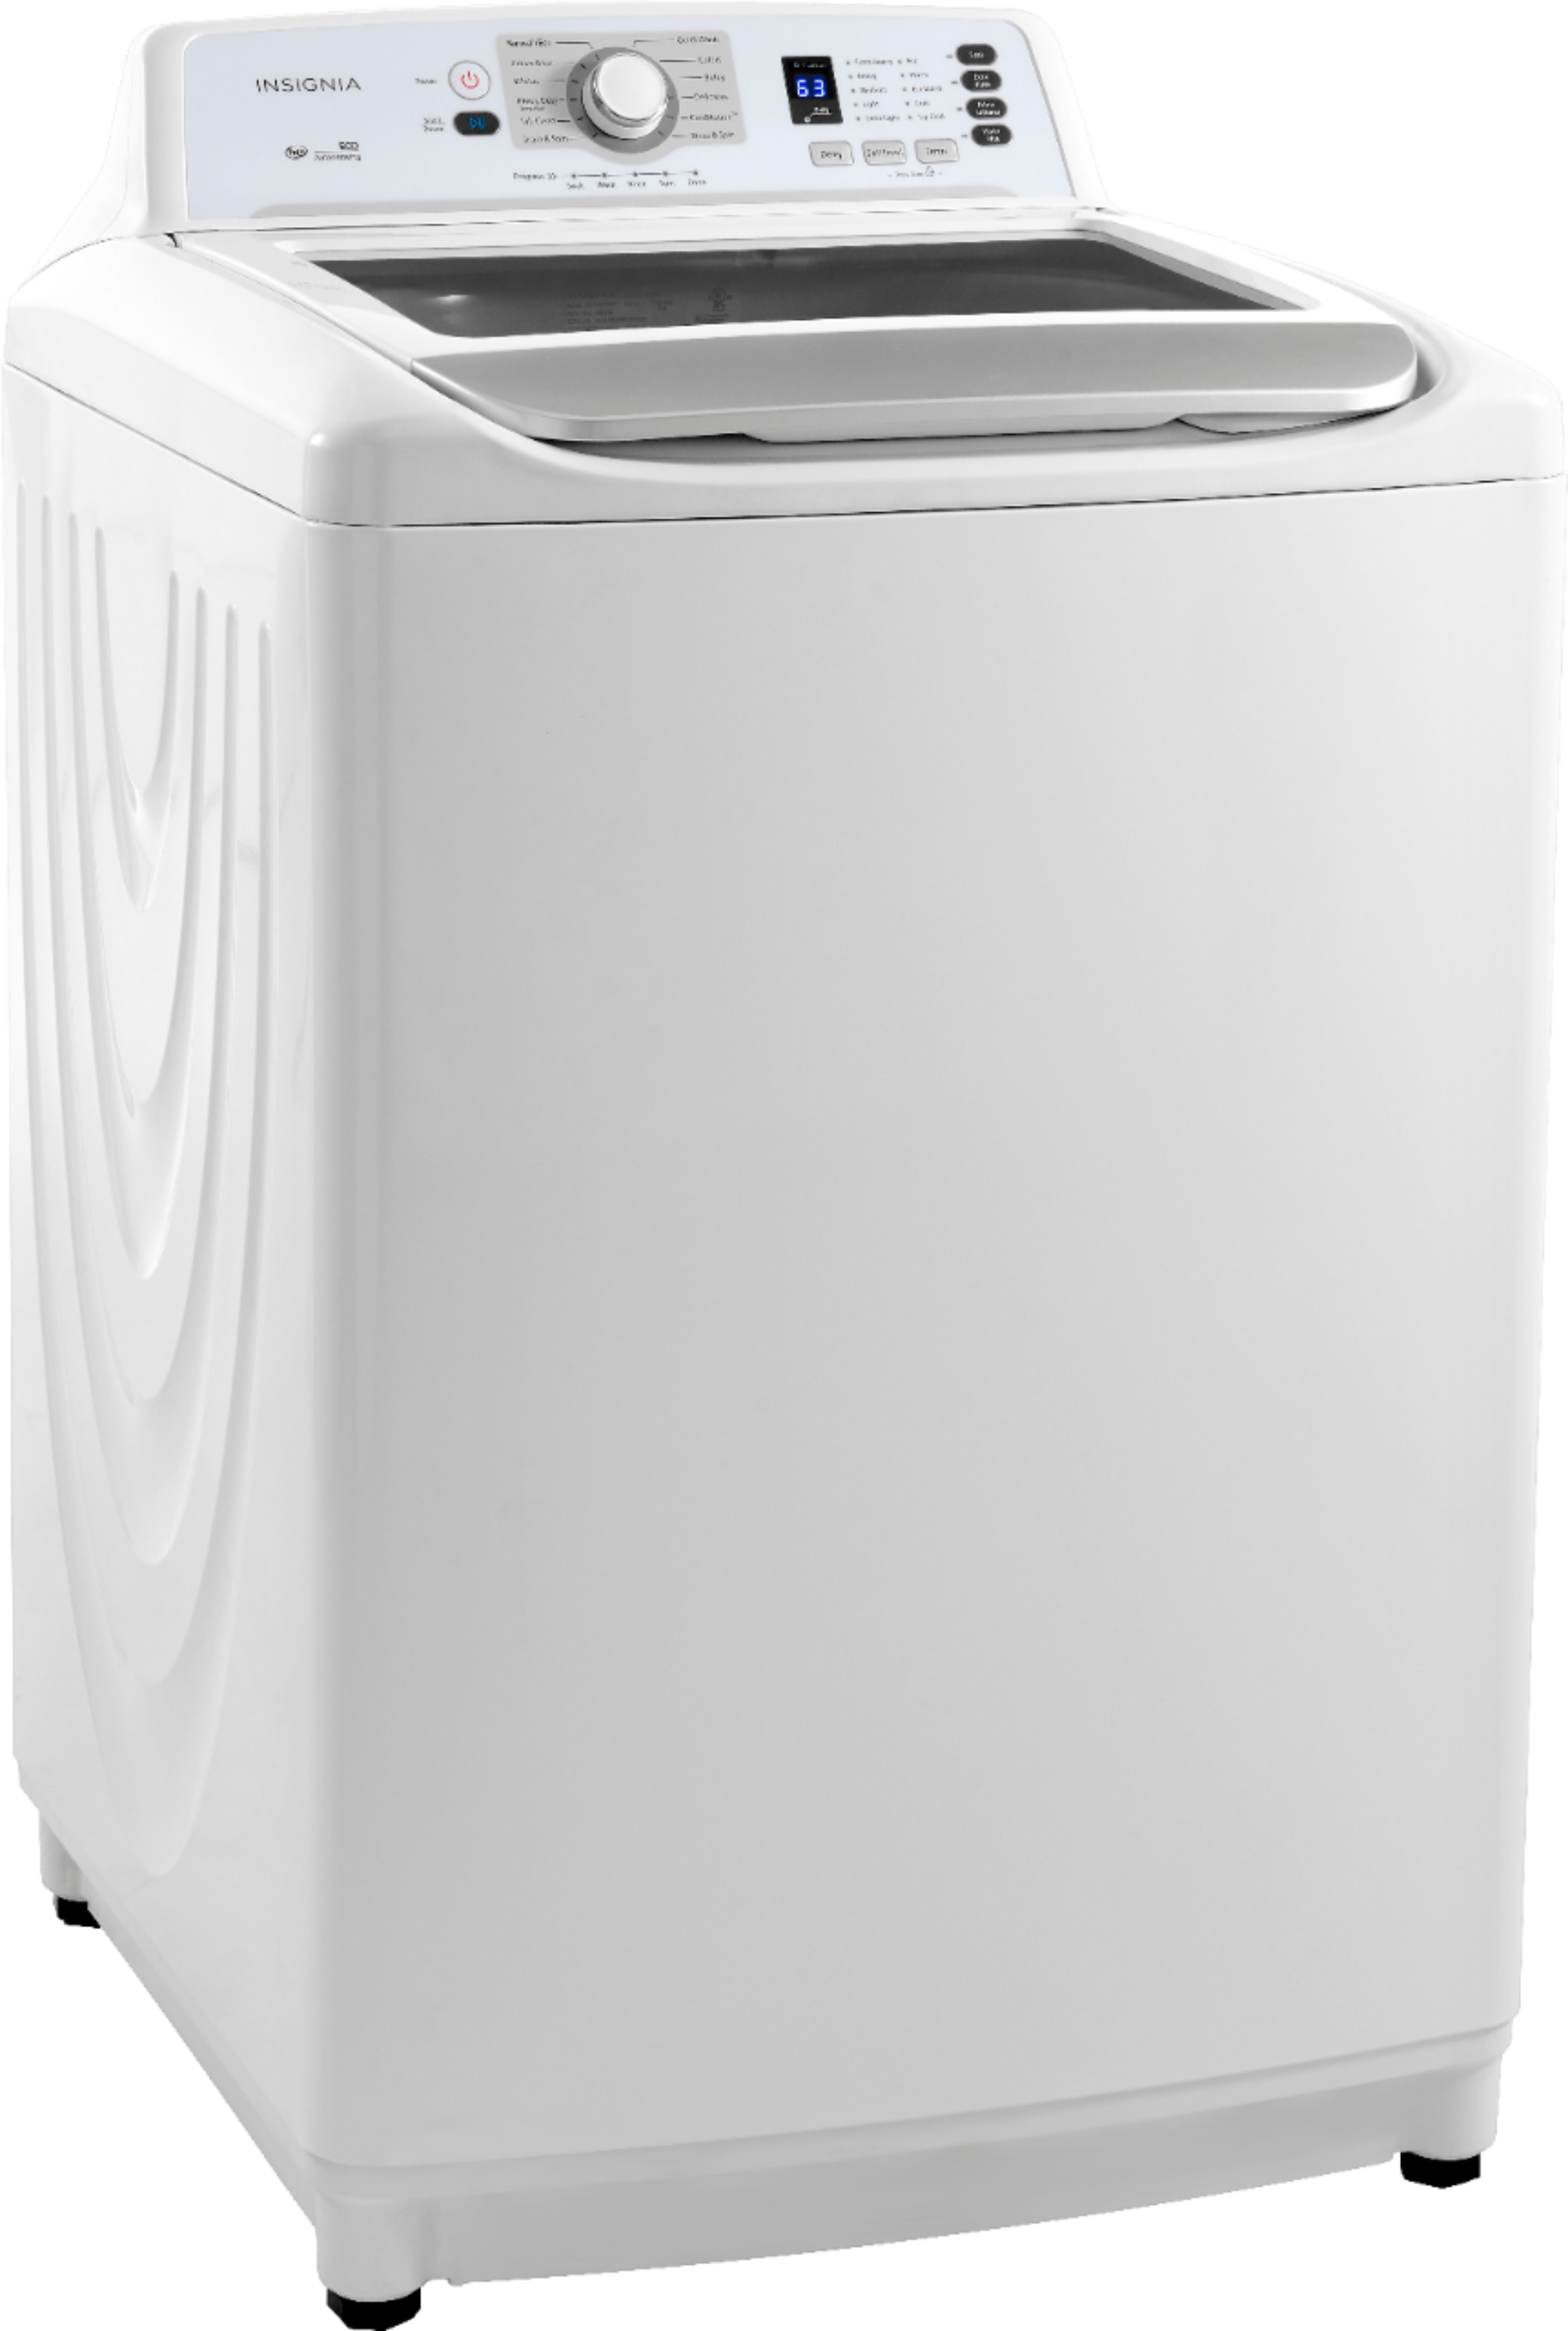 Insignia - 4.5 Cu. ft. High-Efficiency Front Load Washer - White